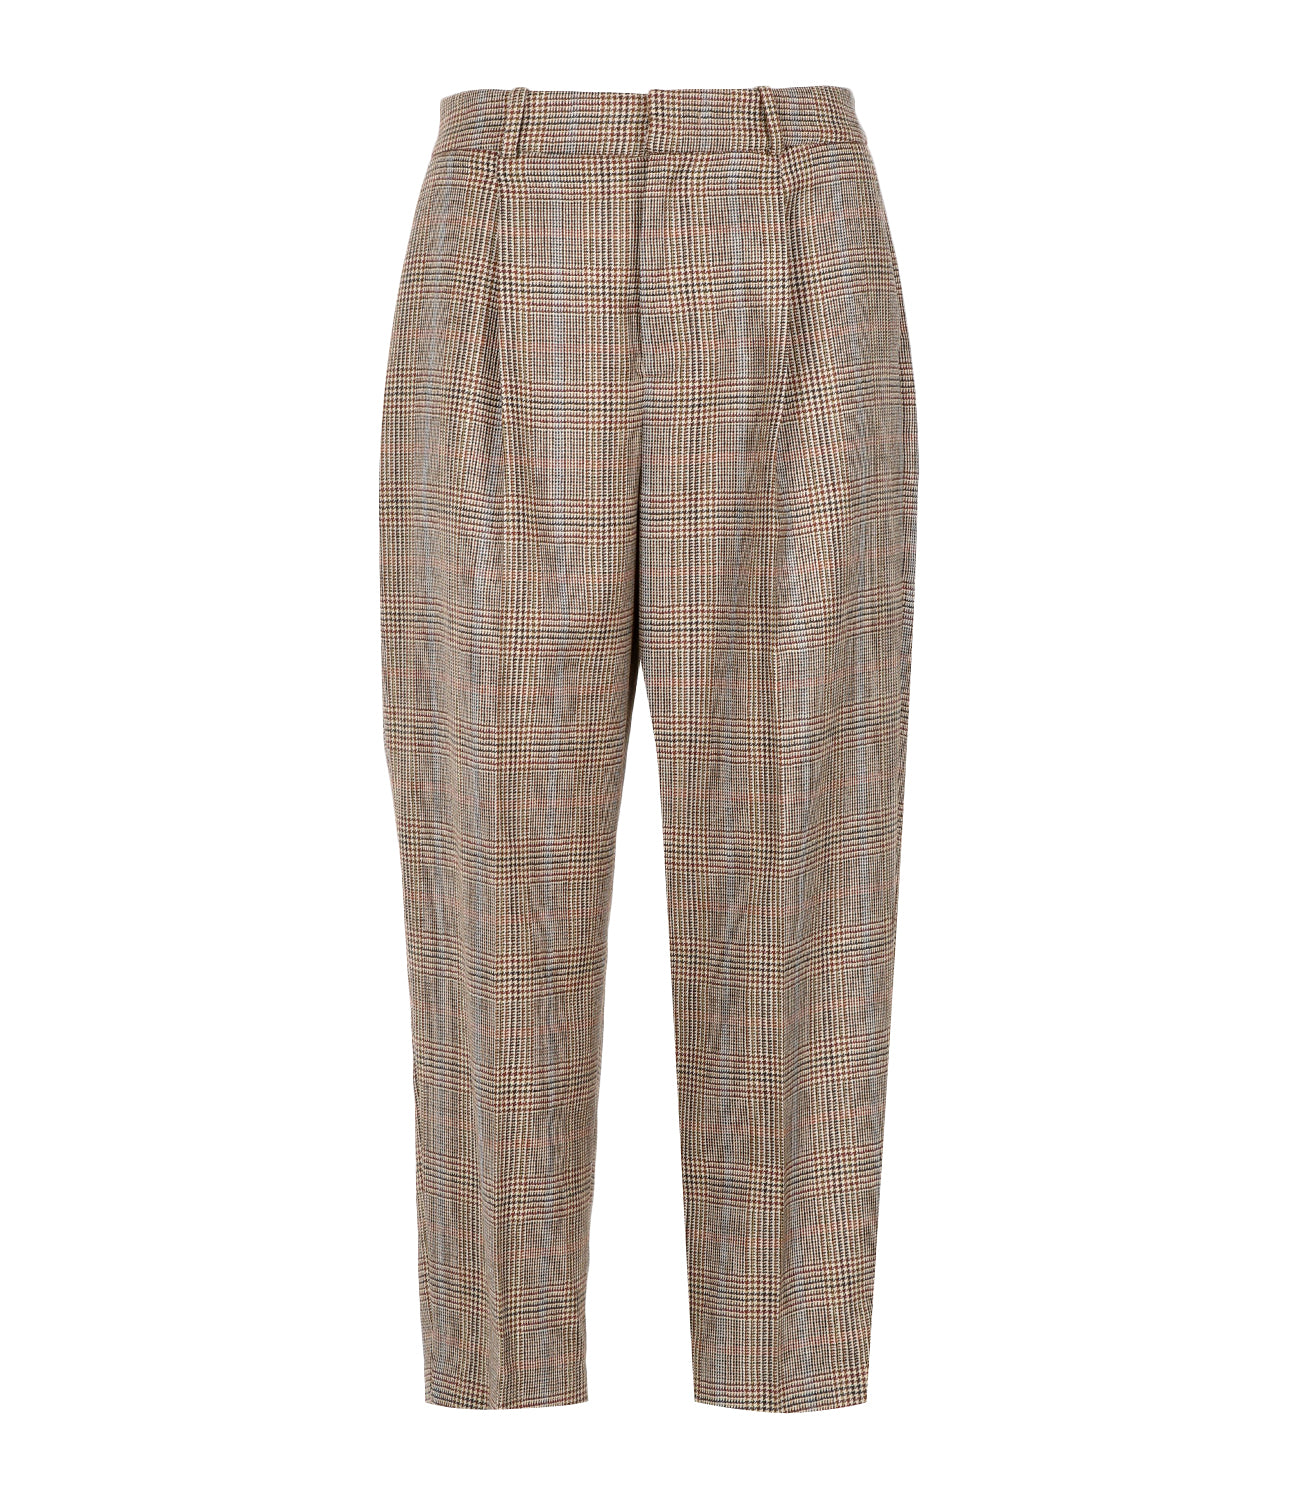 PT Torino | Brown and Beige Trousers